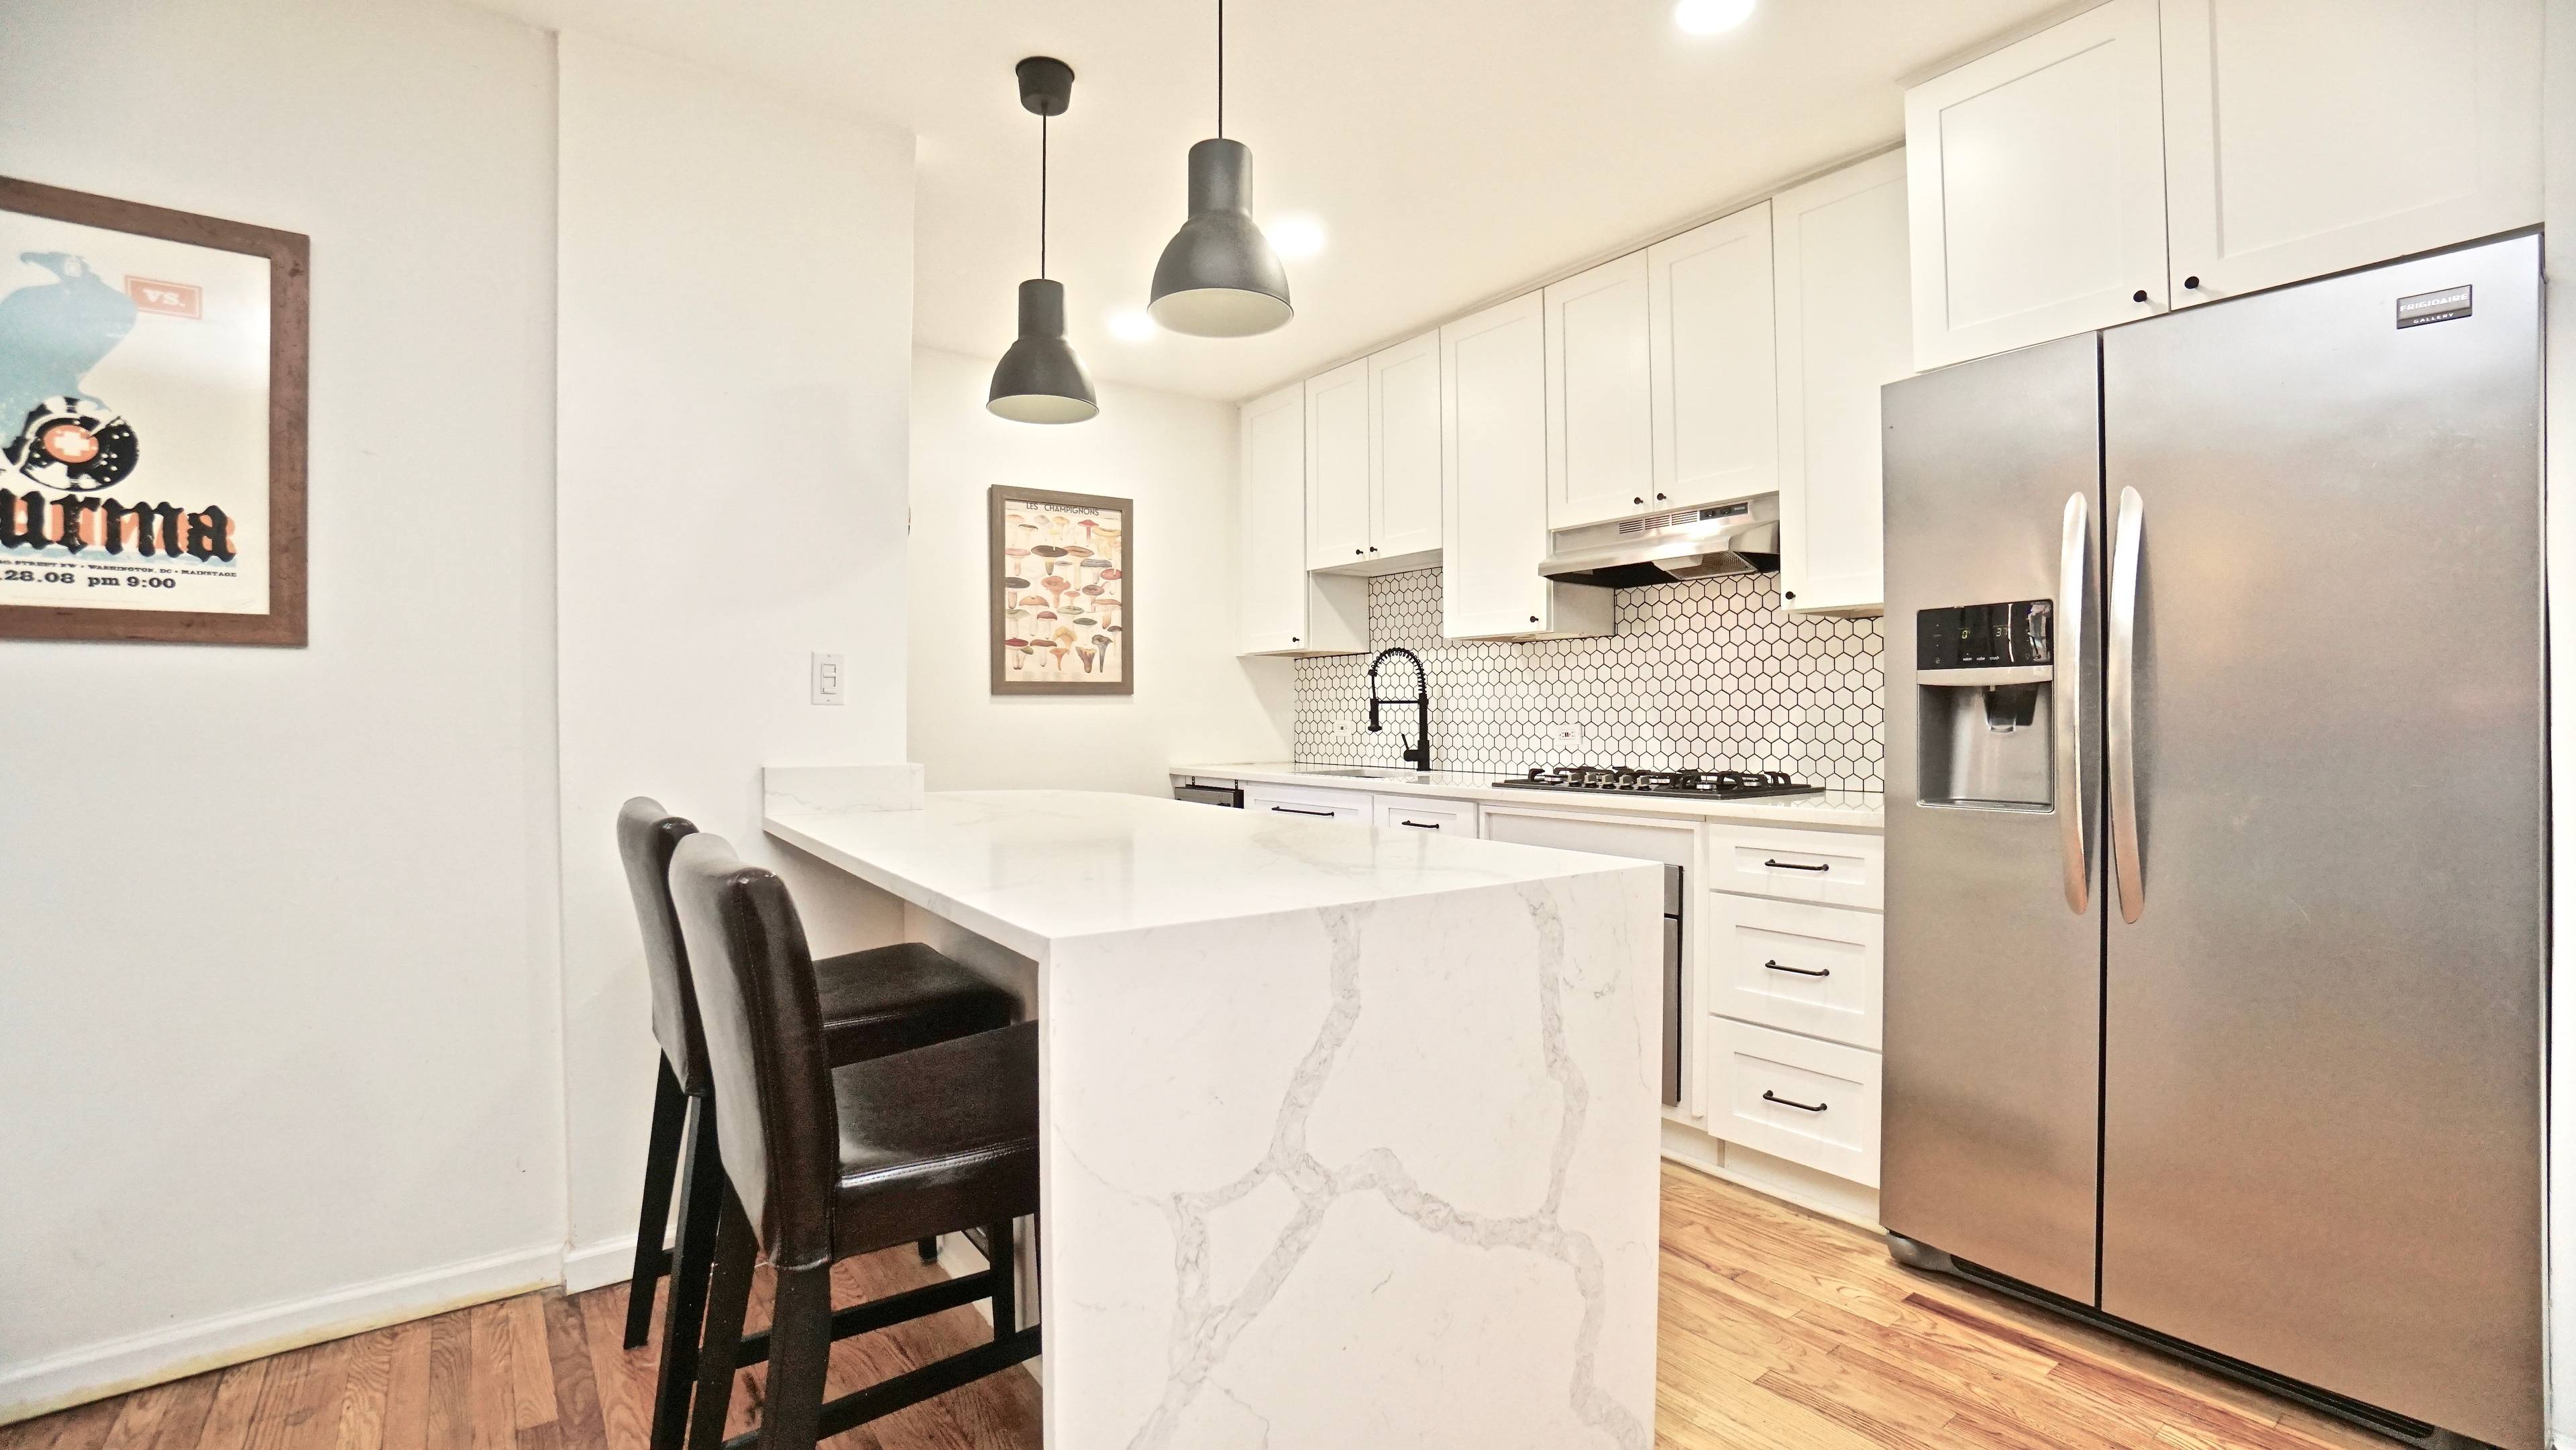 Luxury Renovated 2BR The meticulously designed luxury kitchen with sweeping waterfall countertops are the focal point of this home.